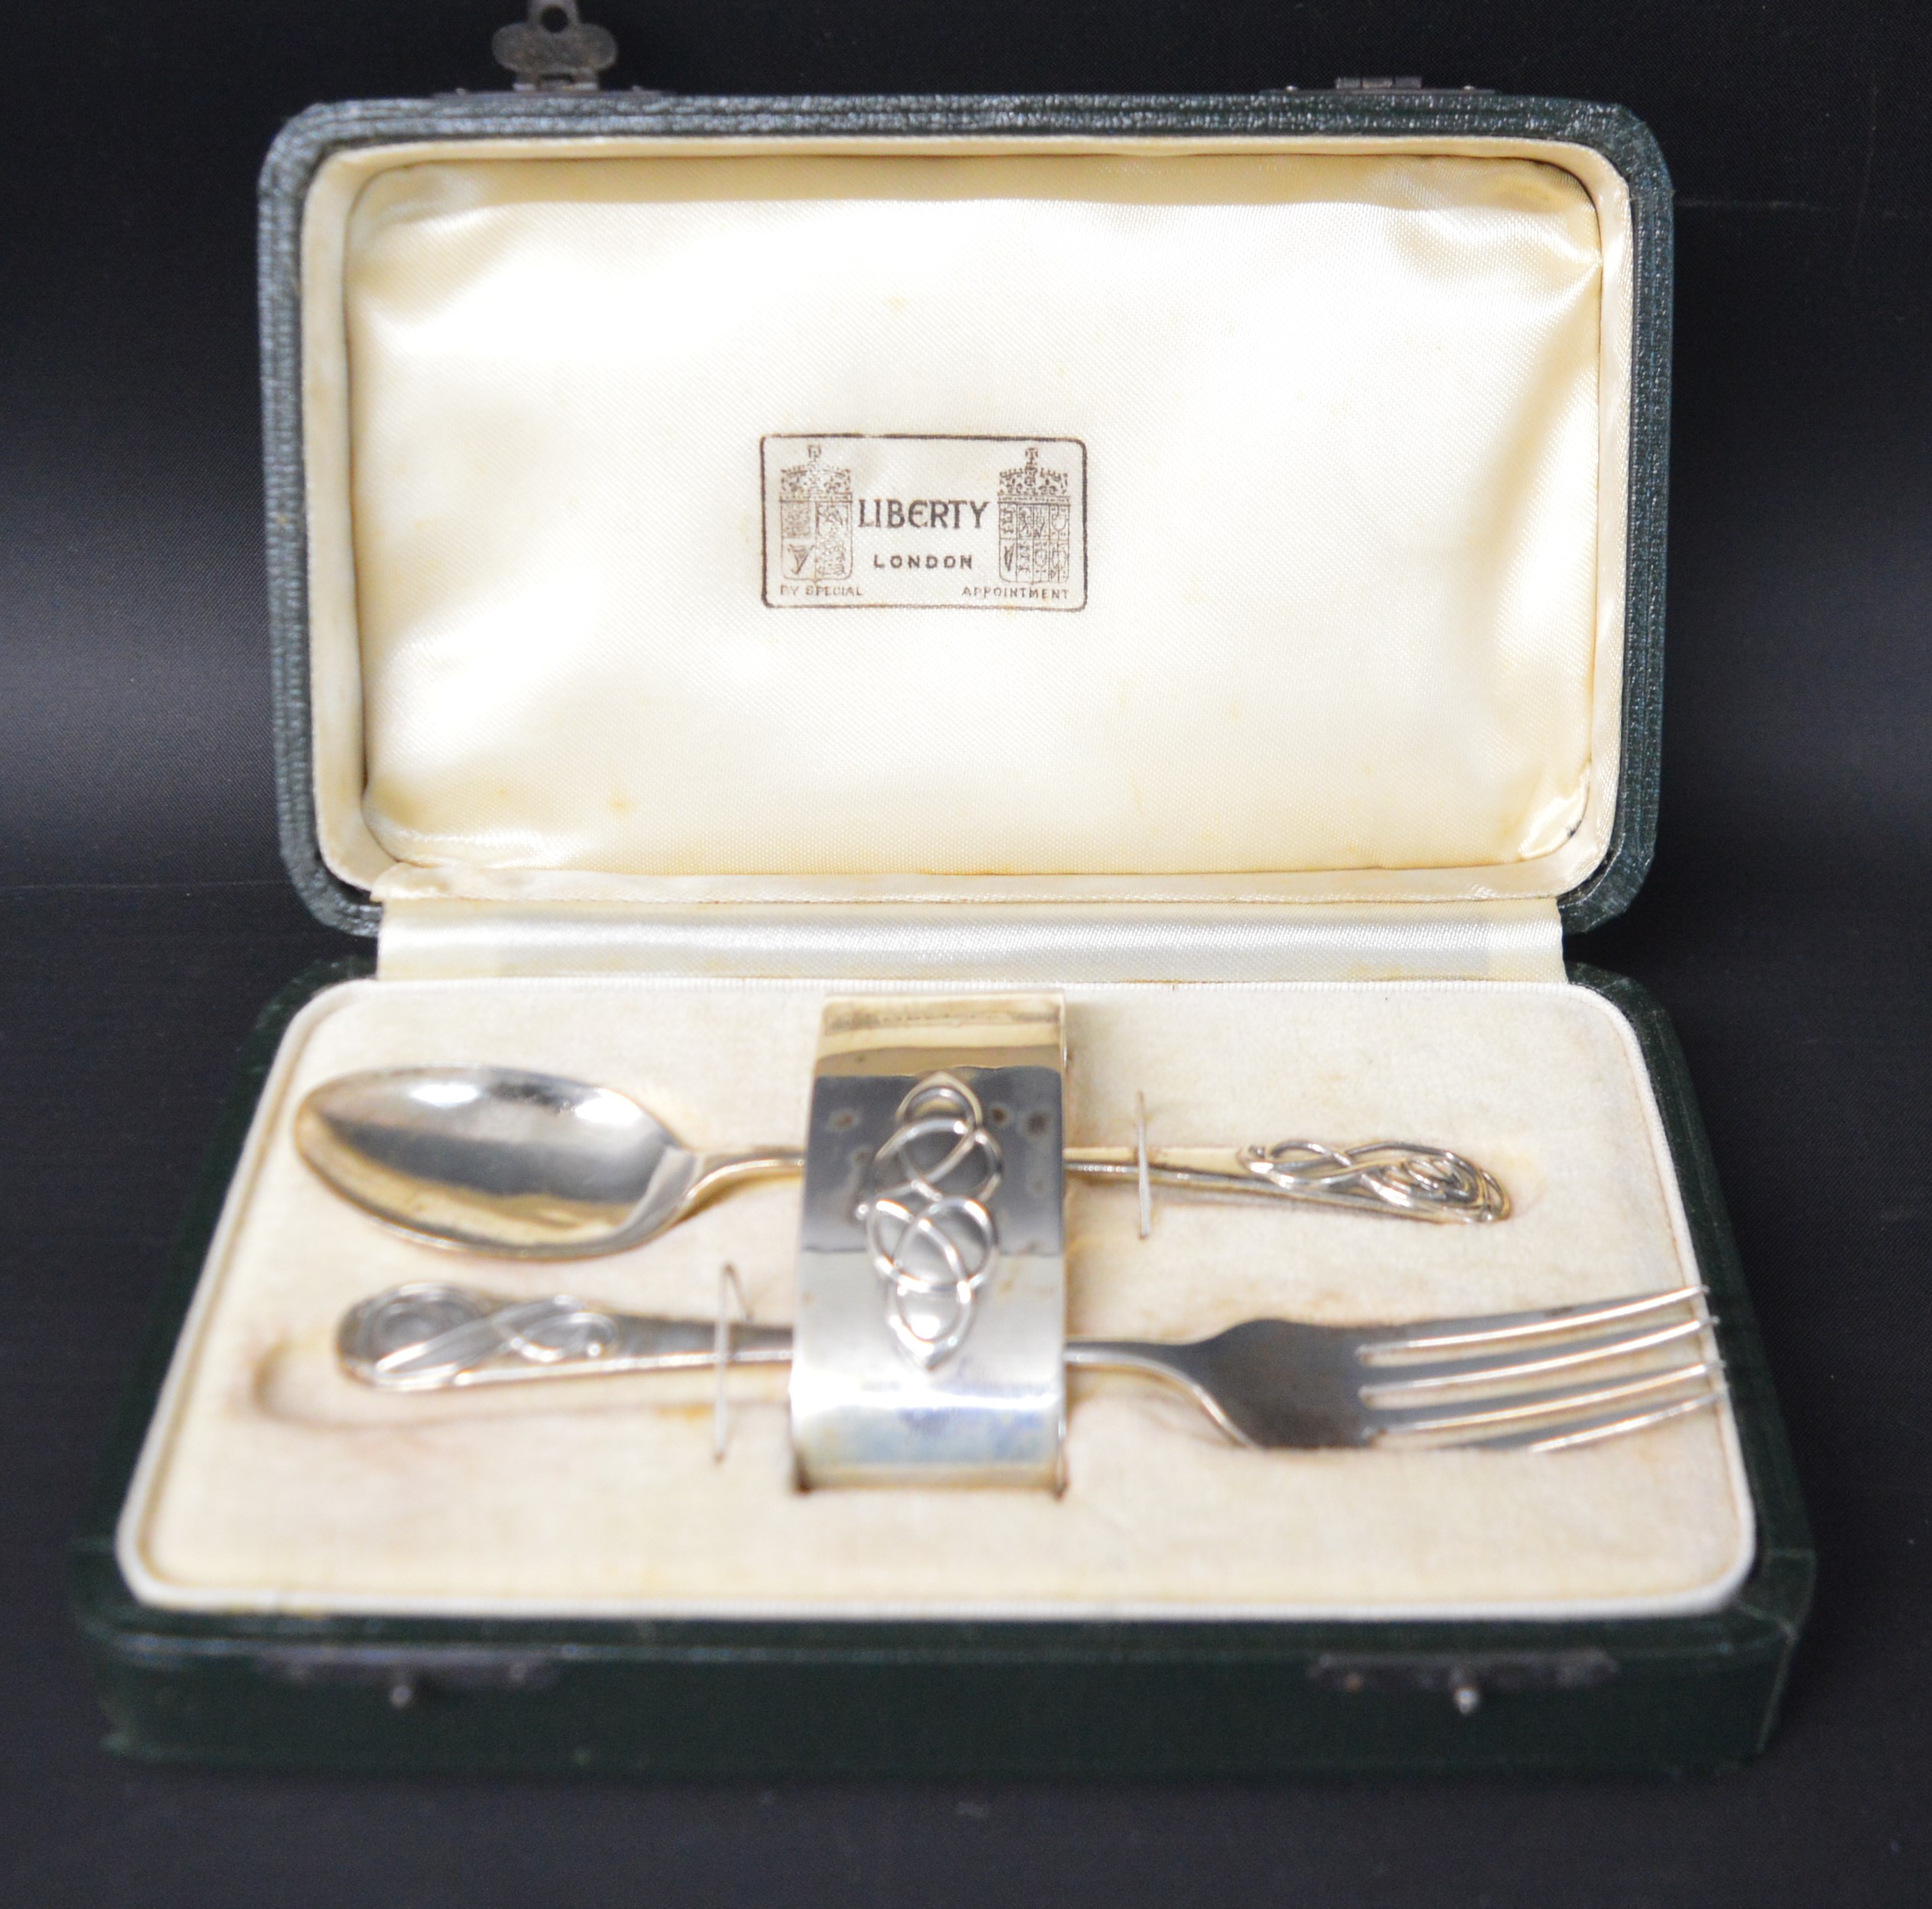 Liberty of London child's cased christening set comprising fork, spoon & napkin ring with Art